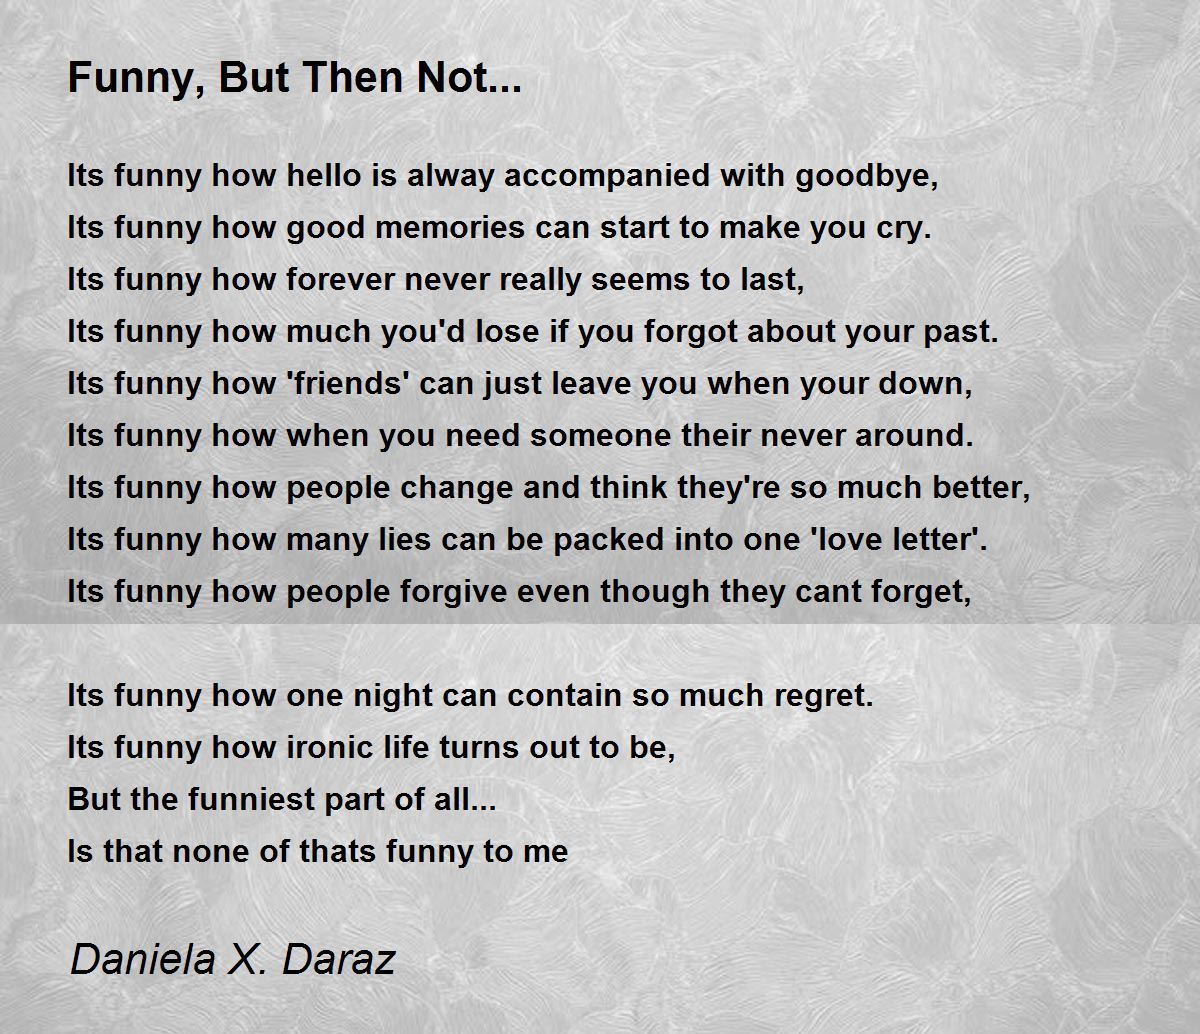 Funny, But Then Not... - Funny, But Then Not... Poem by Daniela X. Daraz